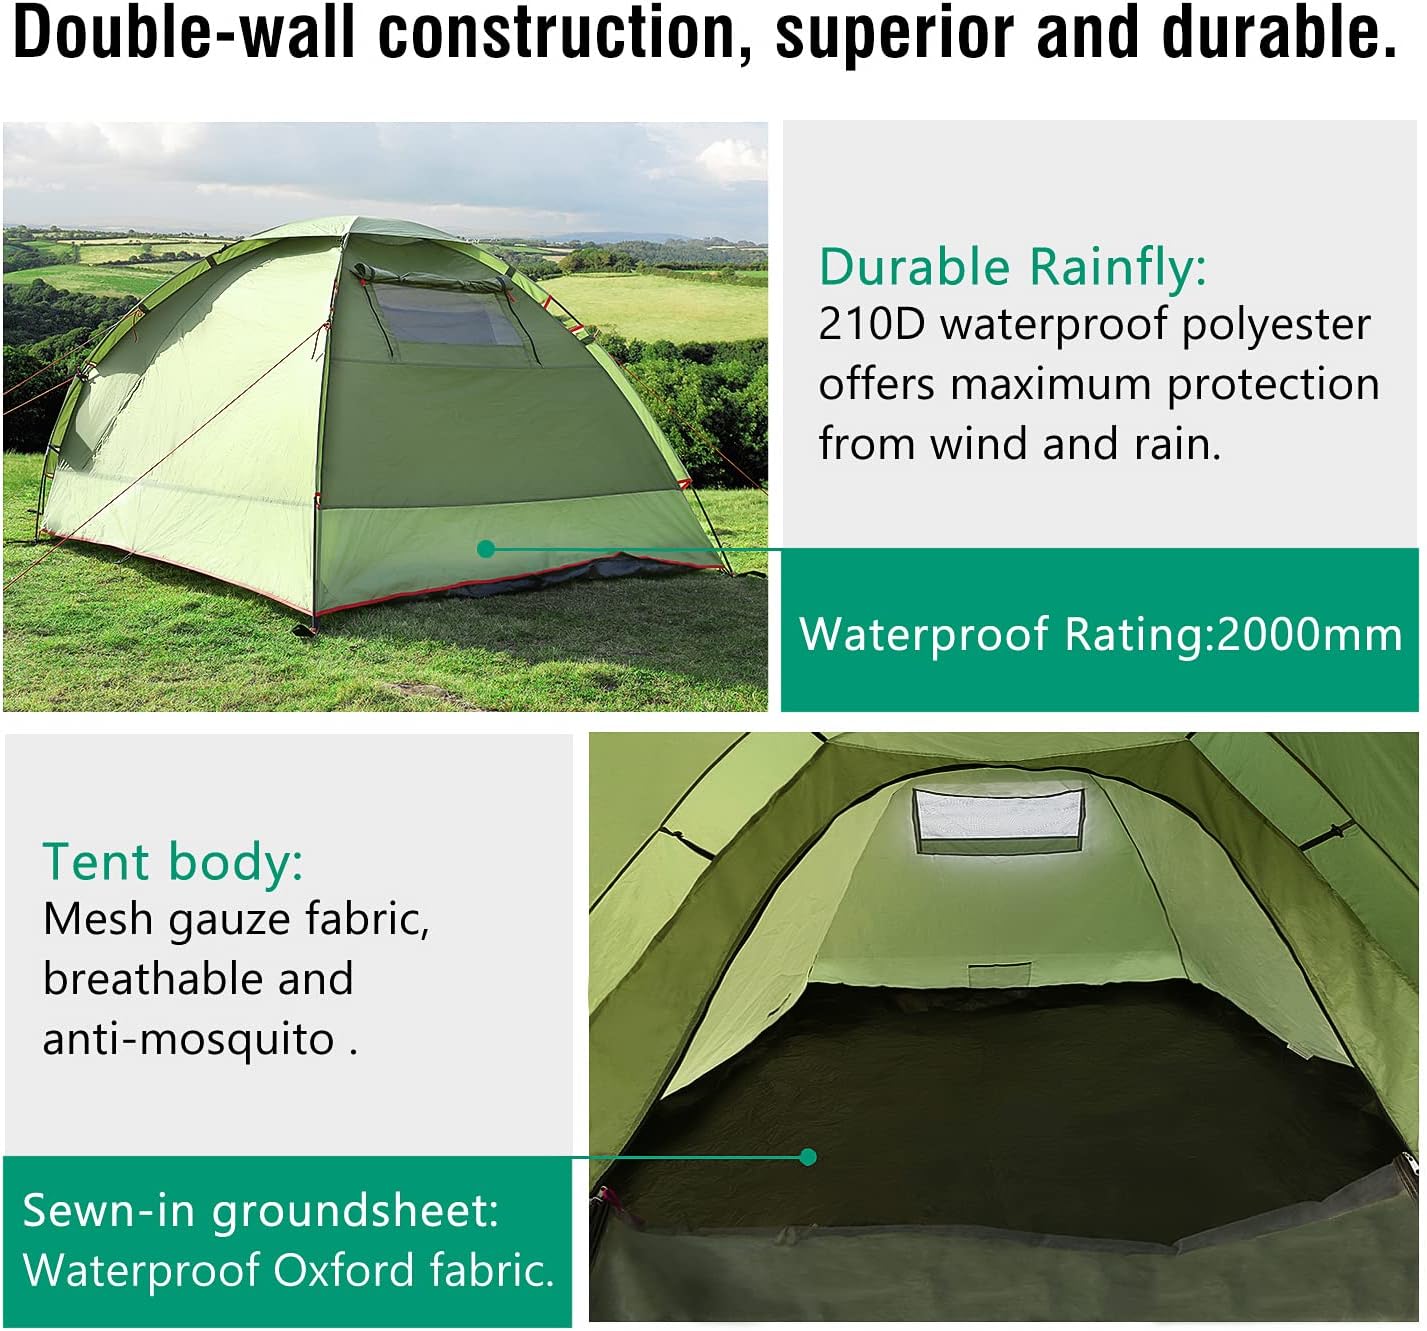 moko geodesic tent green dome tent specification